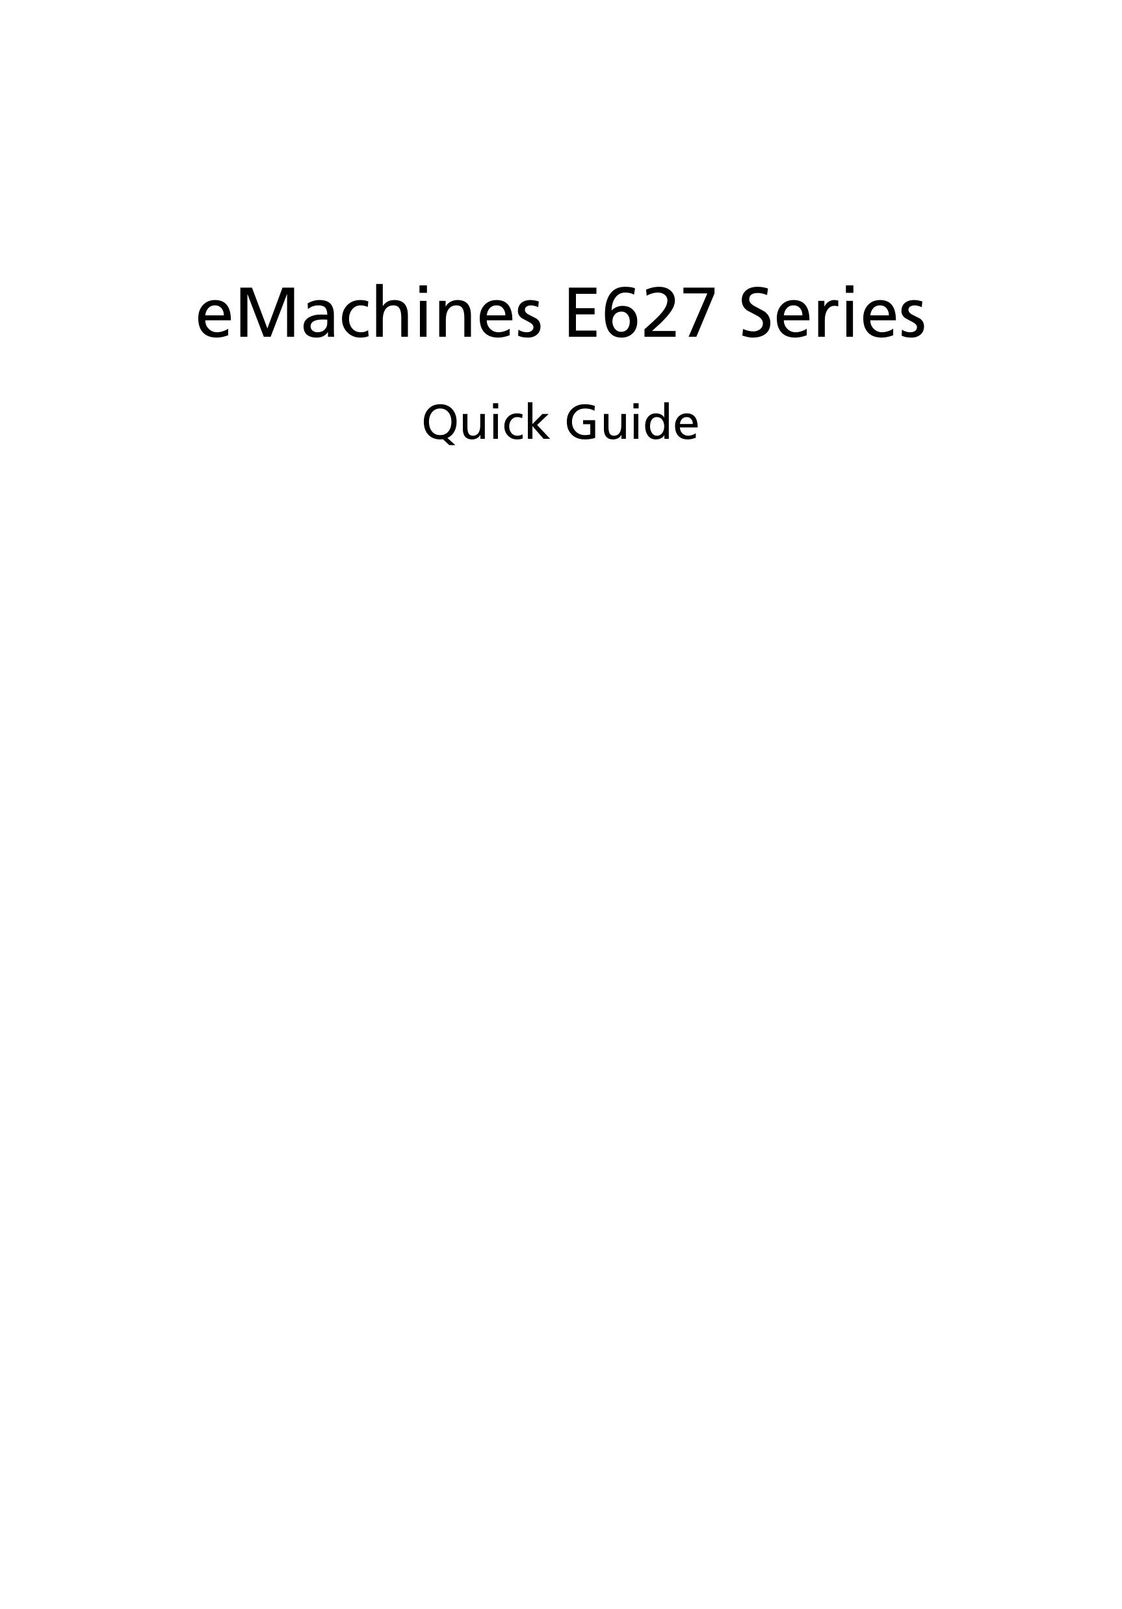 eMachines E627 Series Laptop User Manual